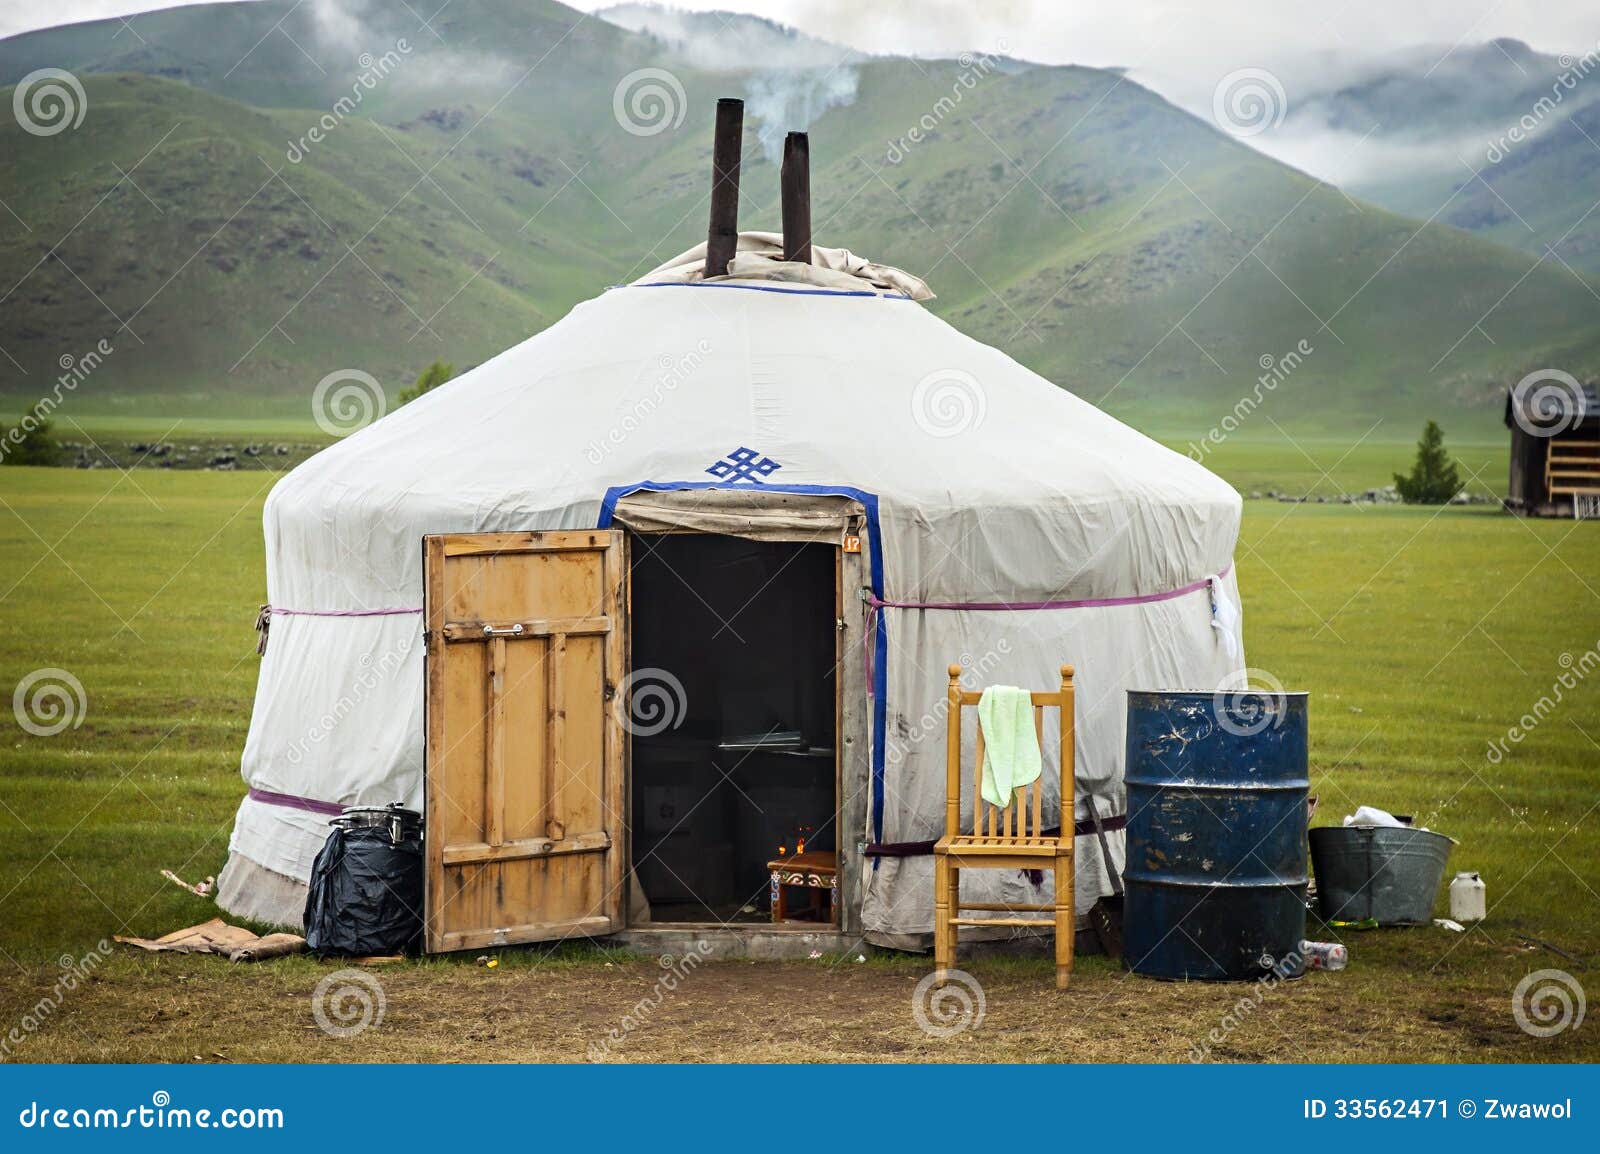 Typical Yurt in Mongolia stock image. Image of camp, autumn - 33562471